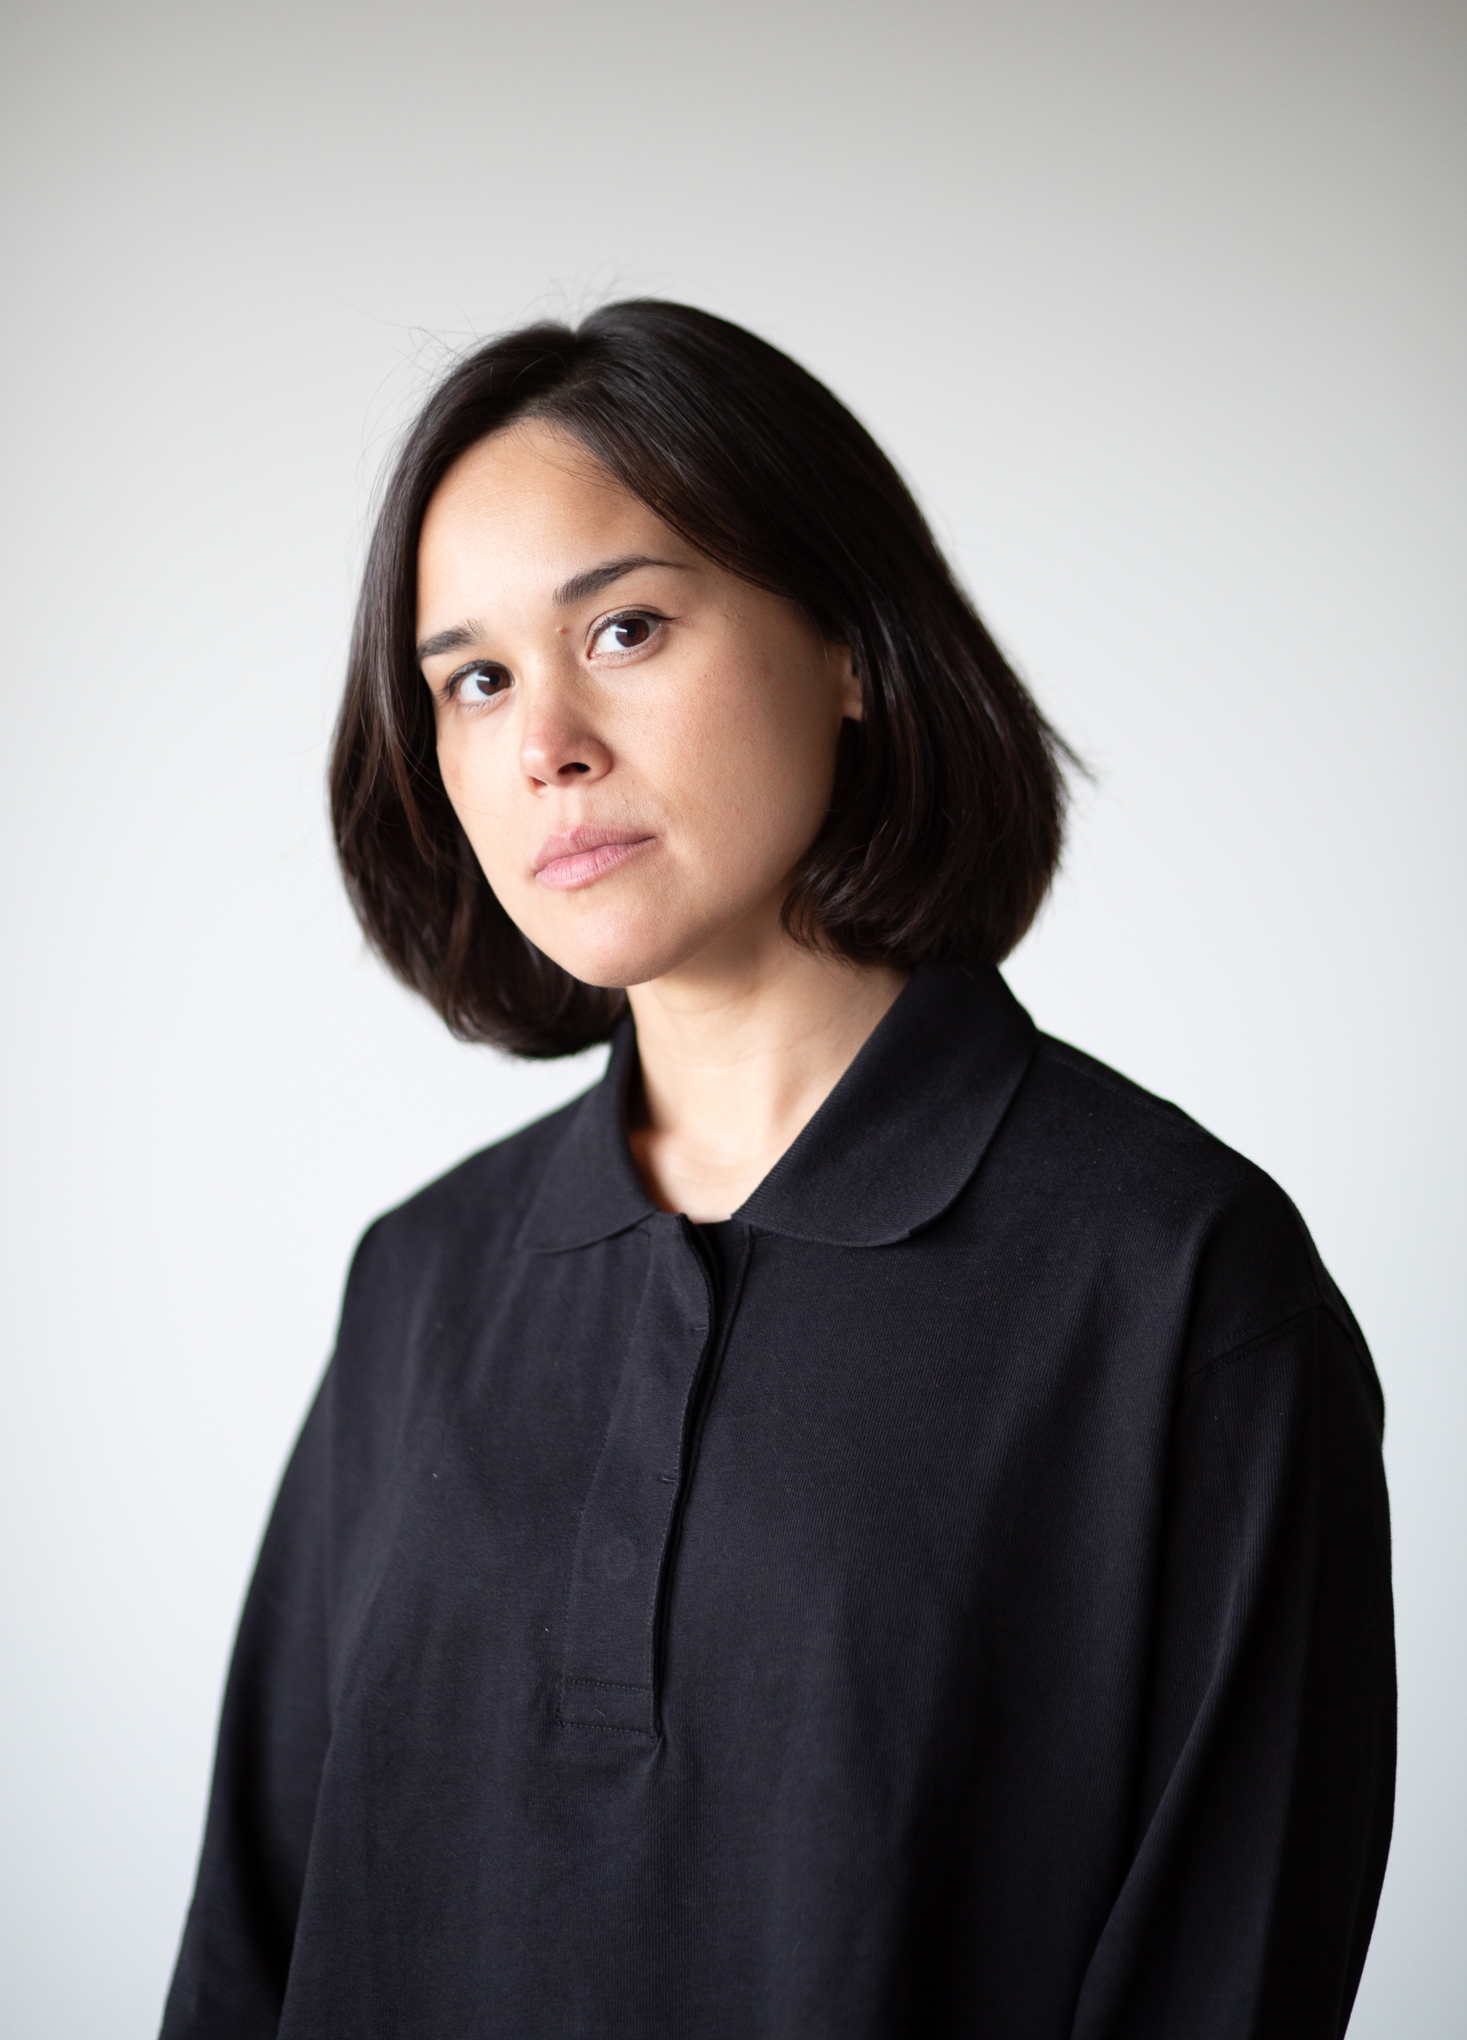 A woman, dressed professionally in a black collared shirt, stands in front of a white wall and looks at the camera.